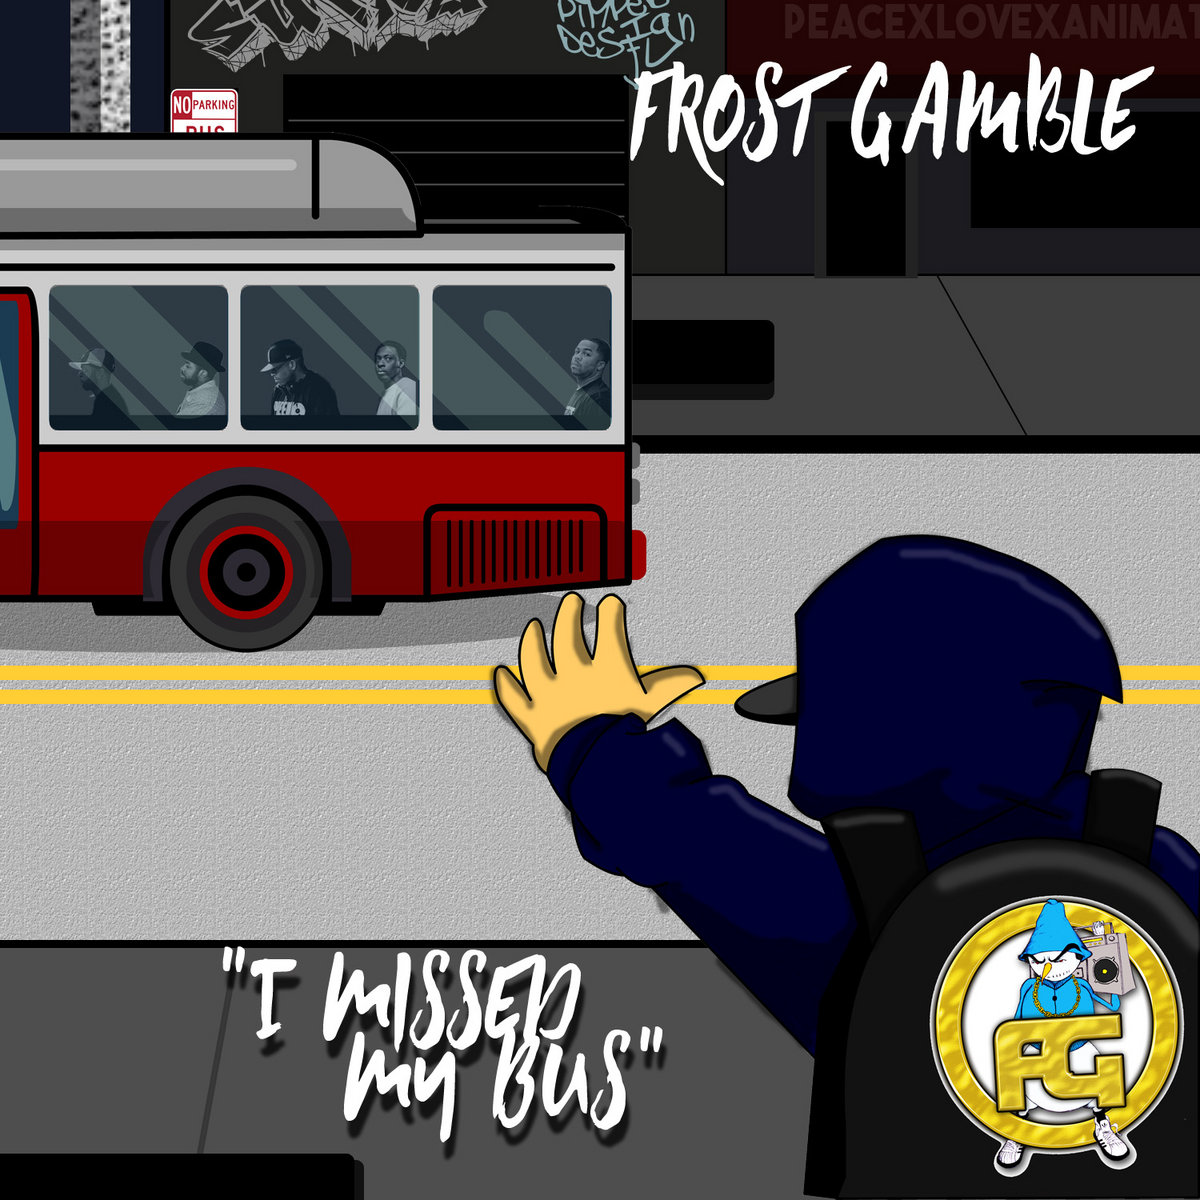 I_missed_my_bus_frost_gamble